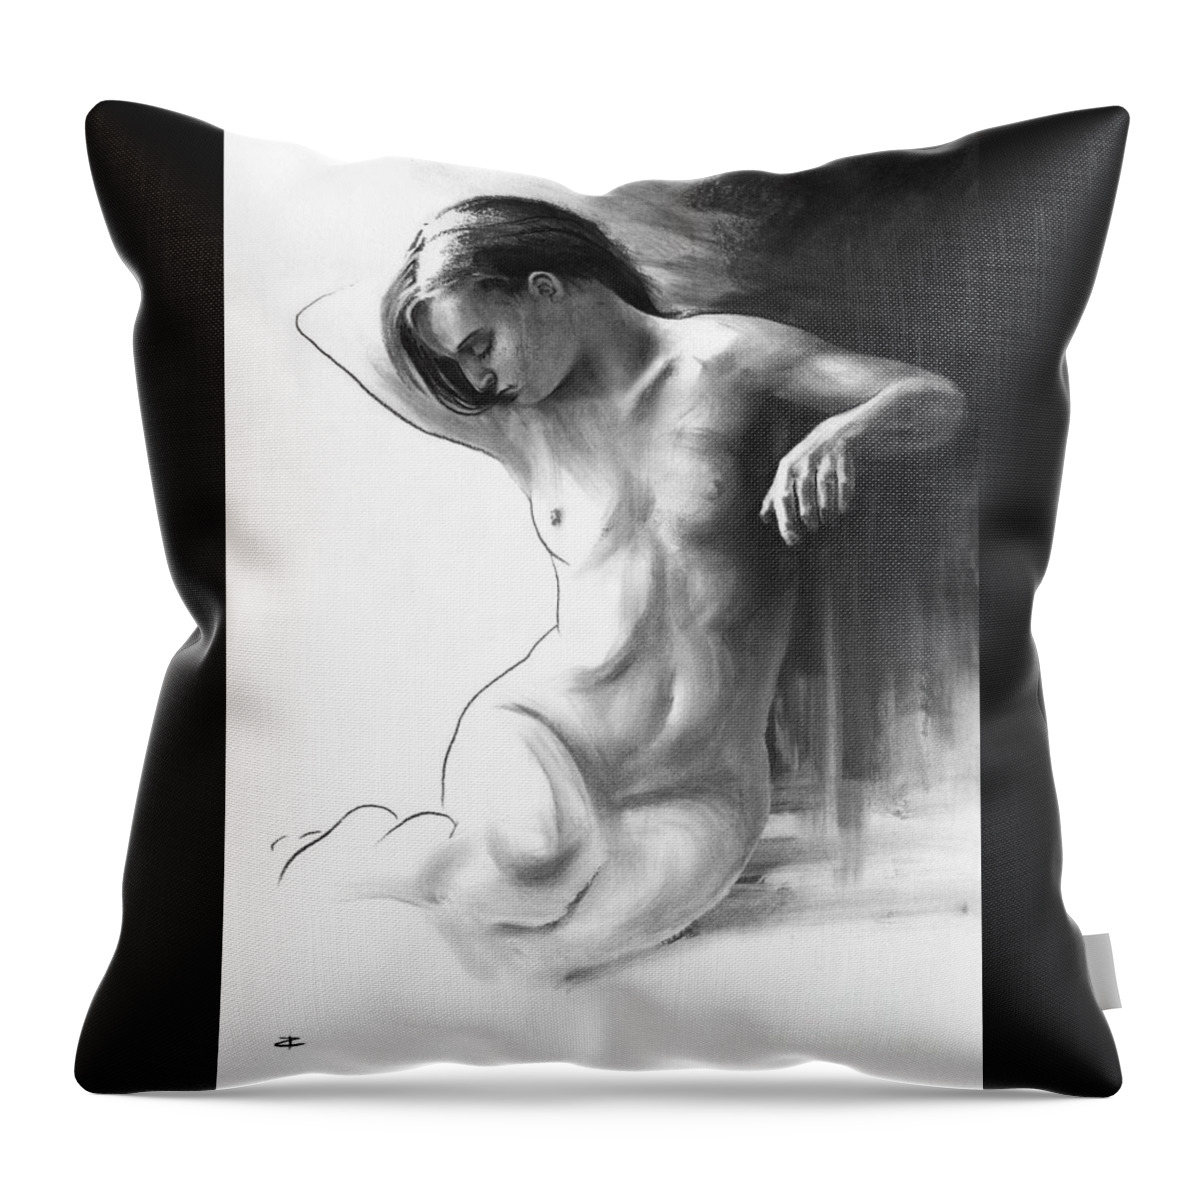 Musing And Contemplations Throw Pillow featuring the drawing Musing and contemplations by Paul Davenport